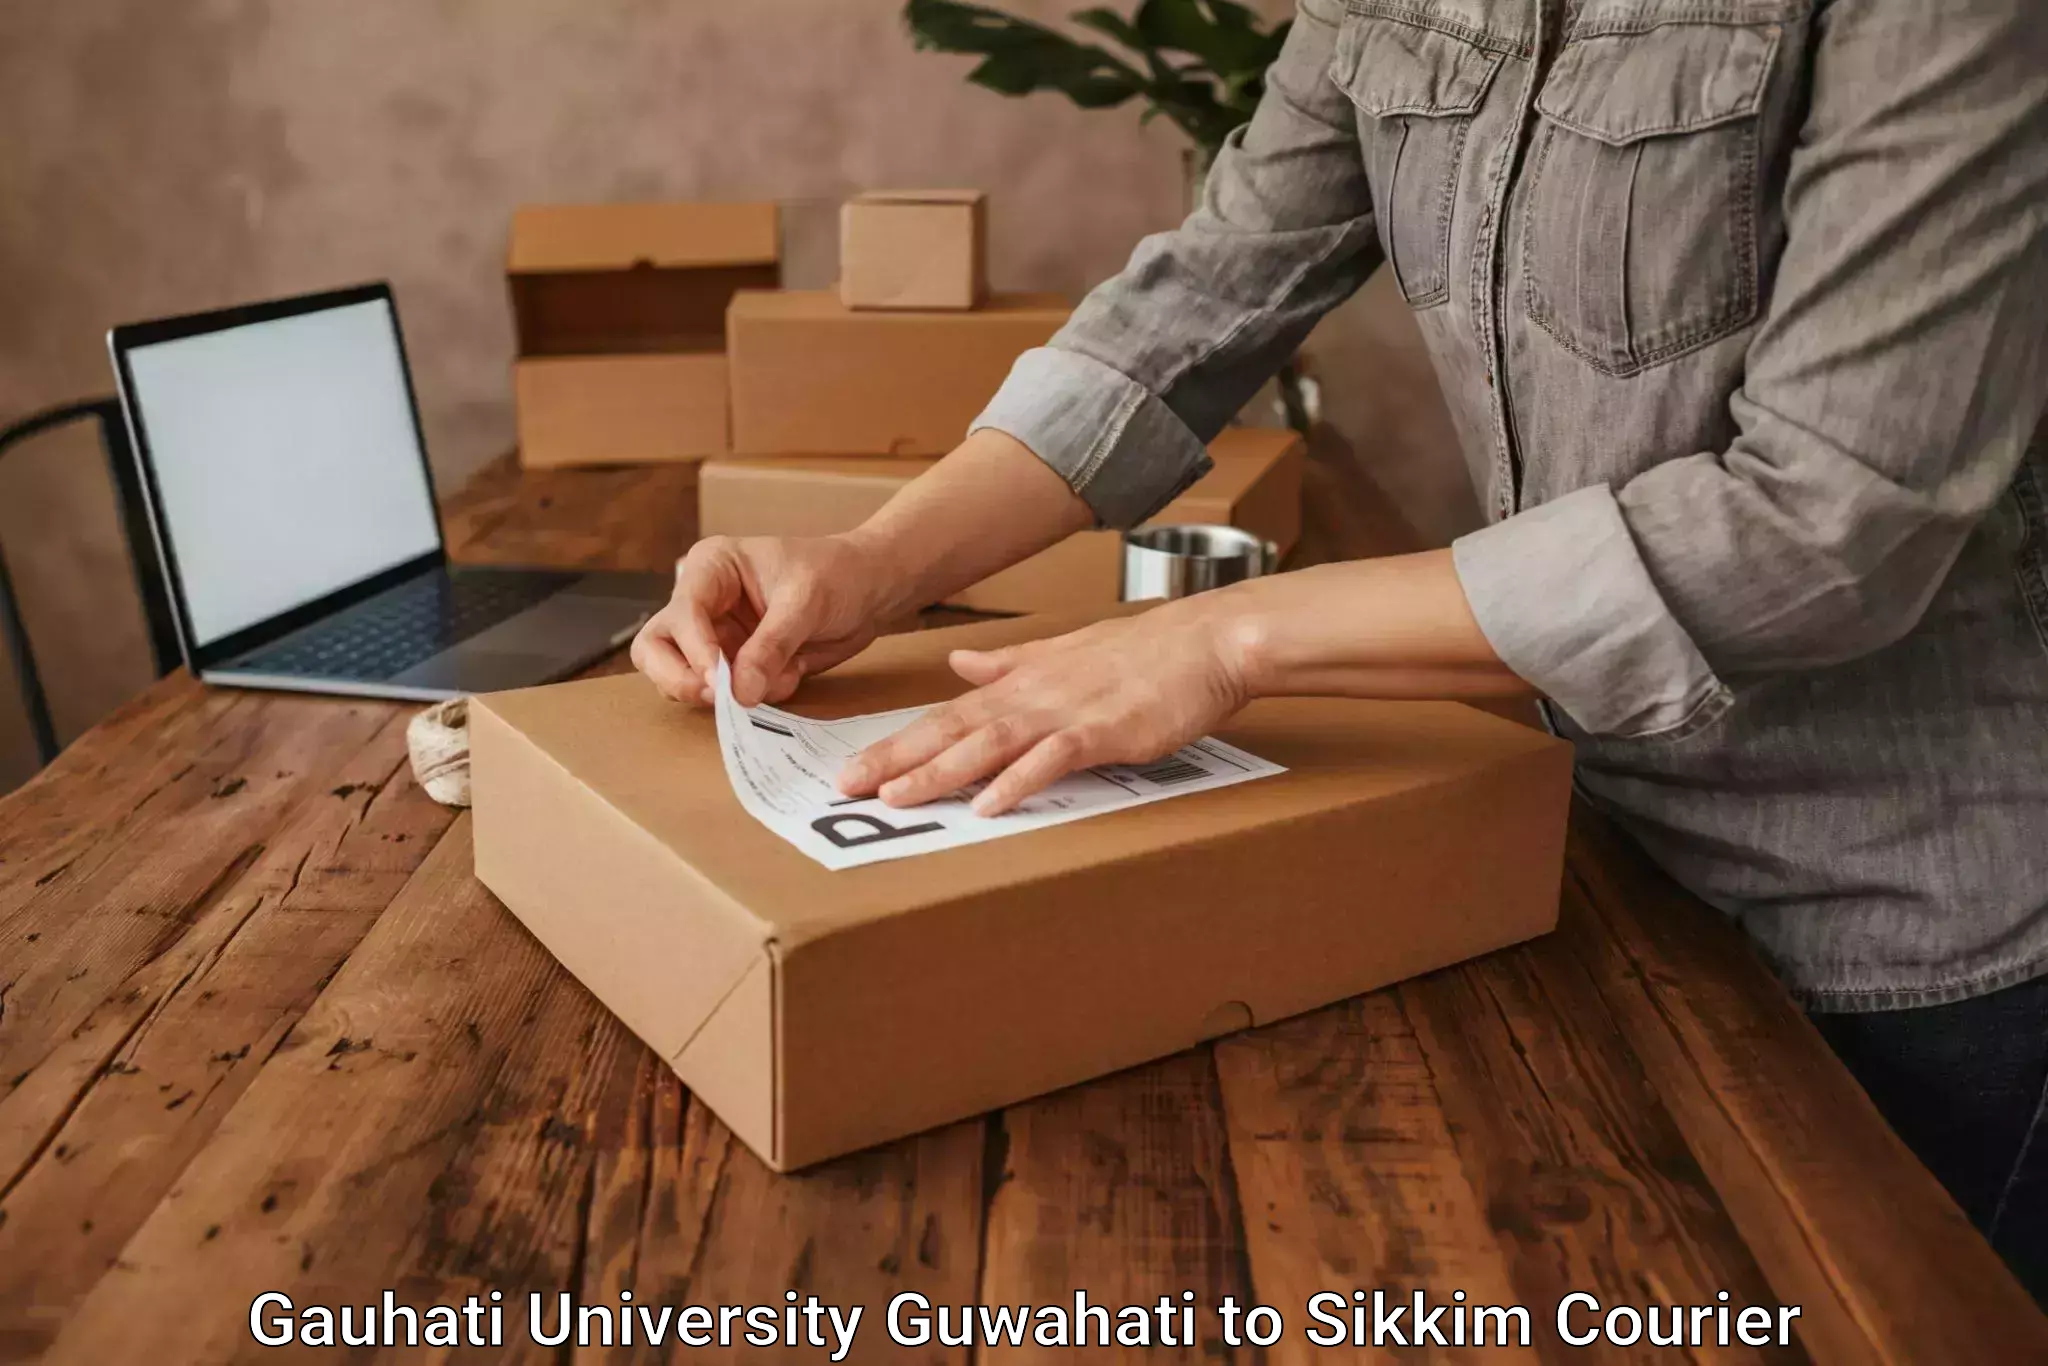 Reliable courier service in Gauhati University Guwahati to Sikkim